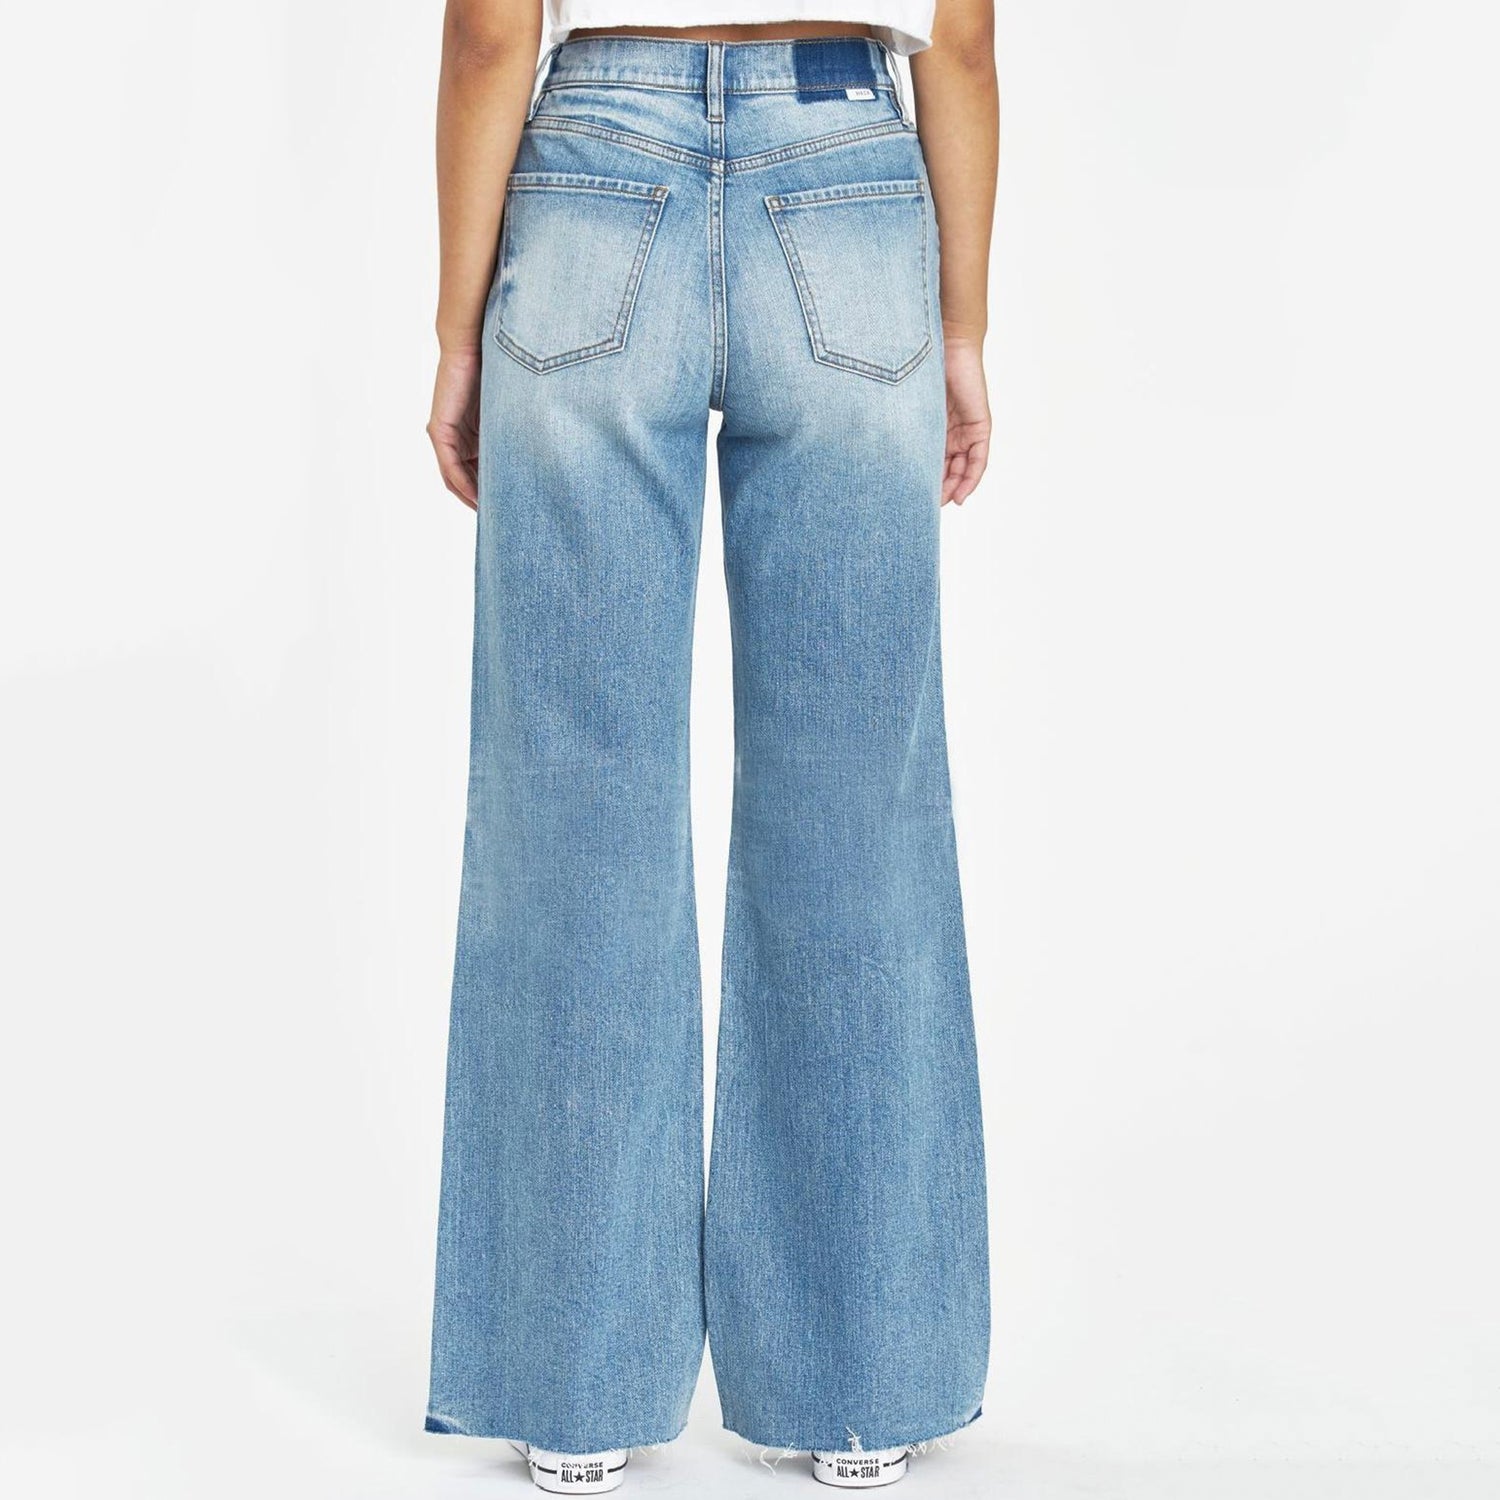 Daze Far Out High Rise Wide Leg Jeans. This high rise wide leg is vintage inspired with its signature "just right" fabric because sometimes you need a little bit of everything. Reliably flattering, consistently kind!